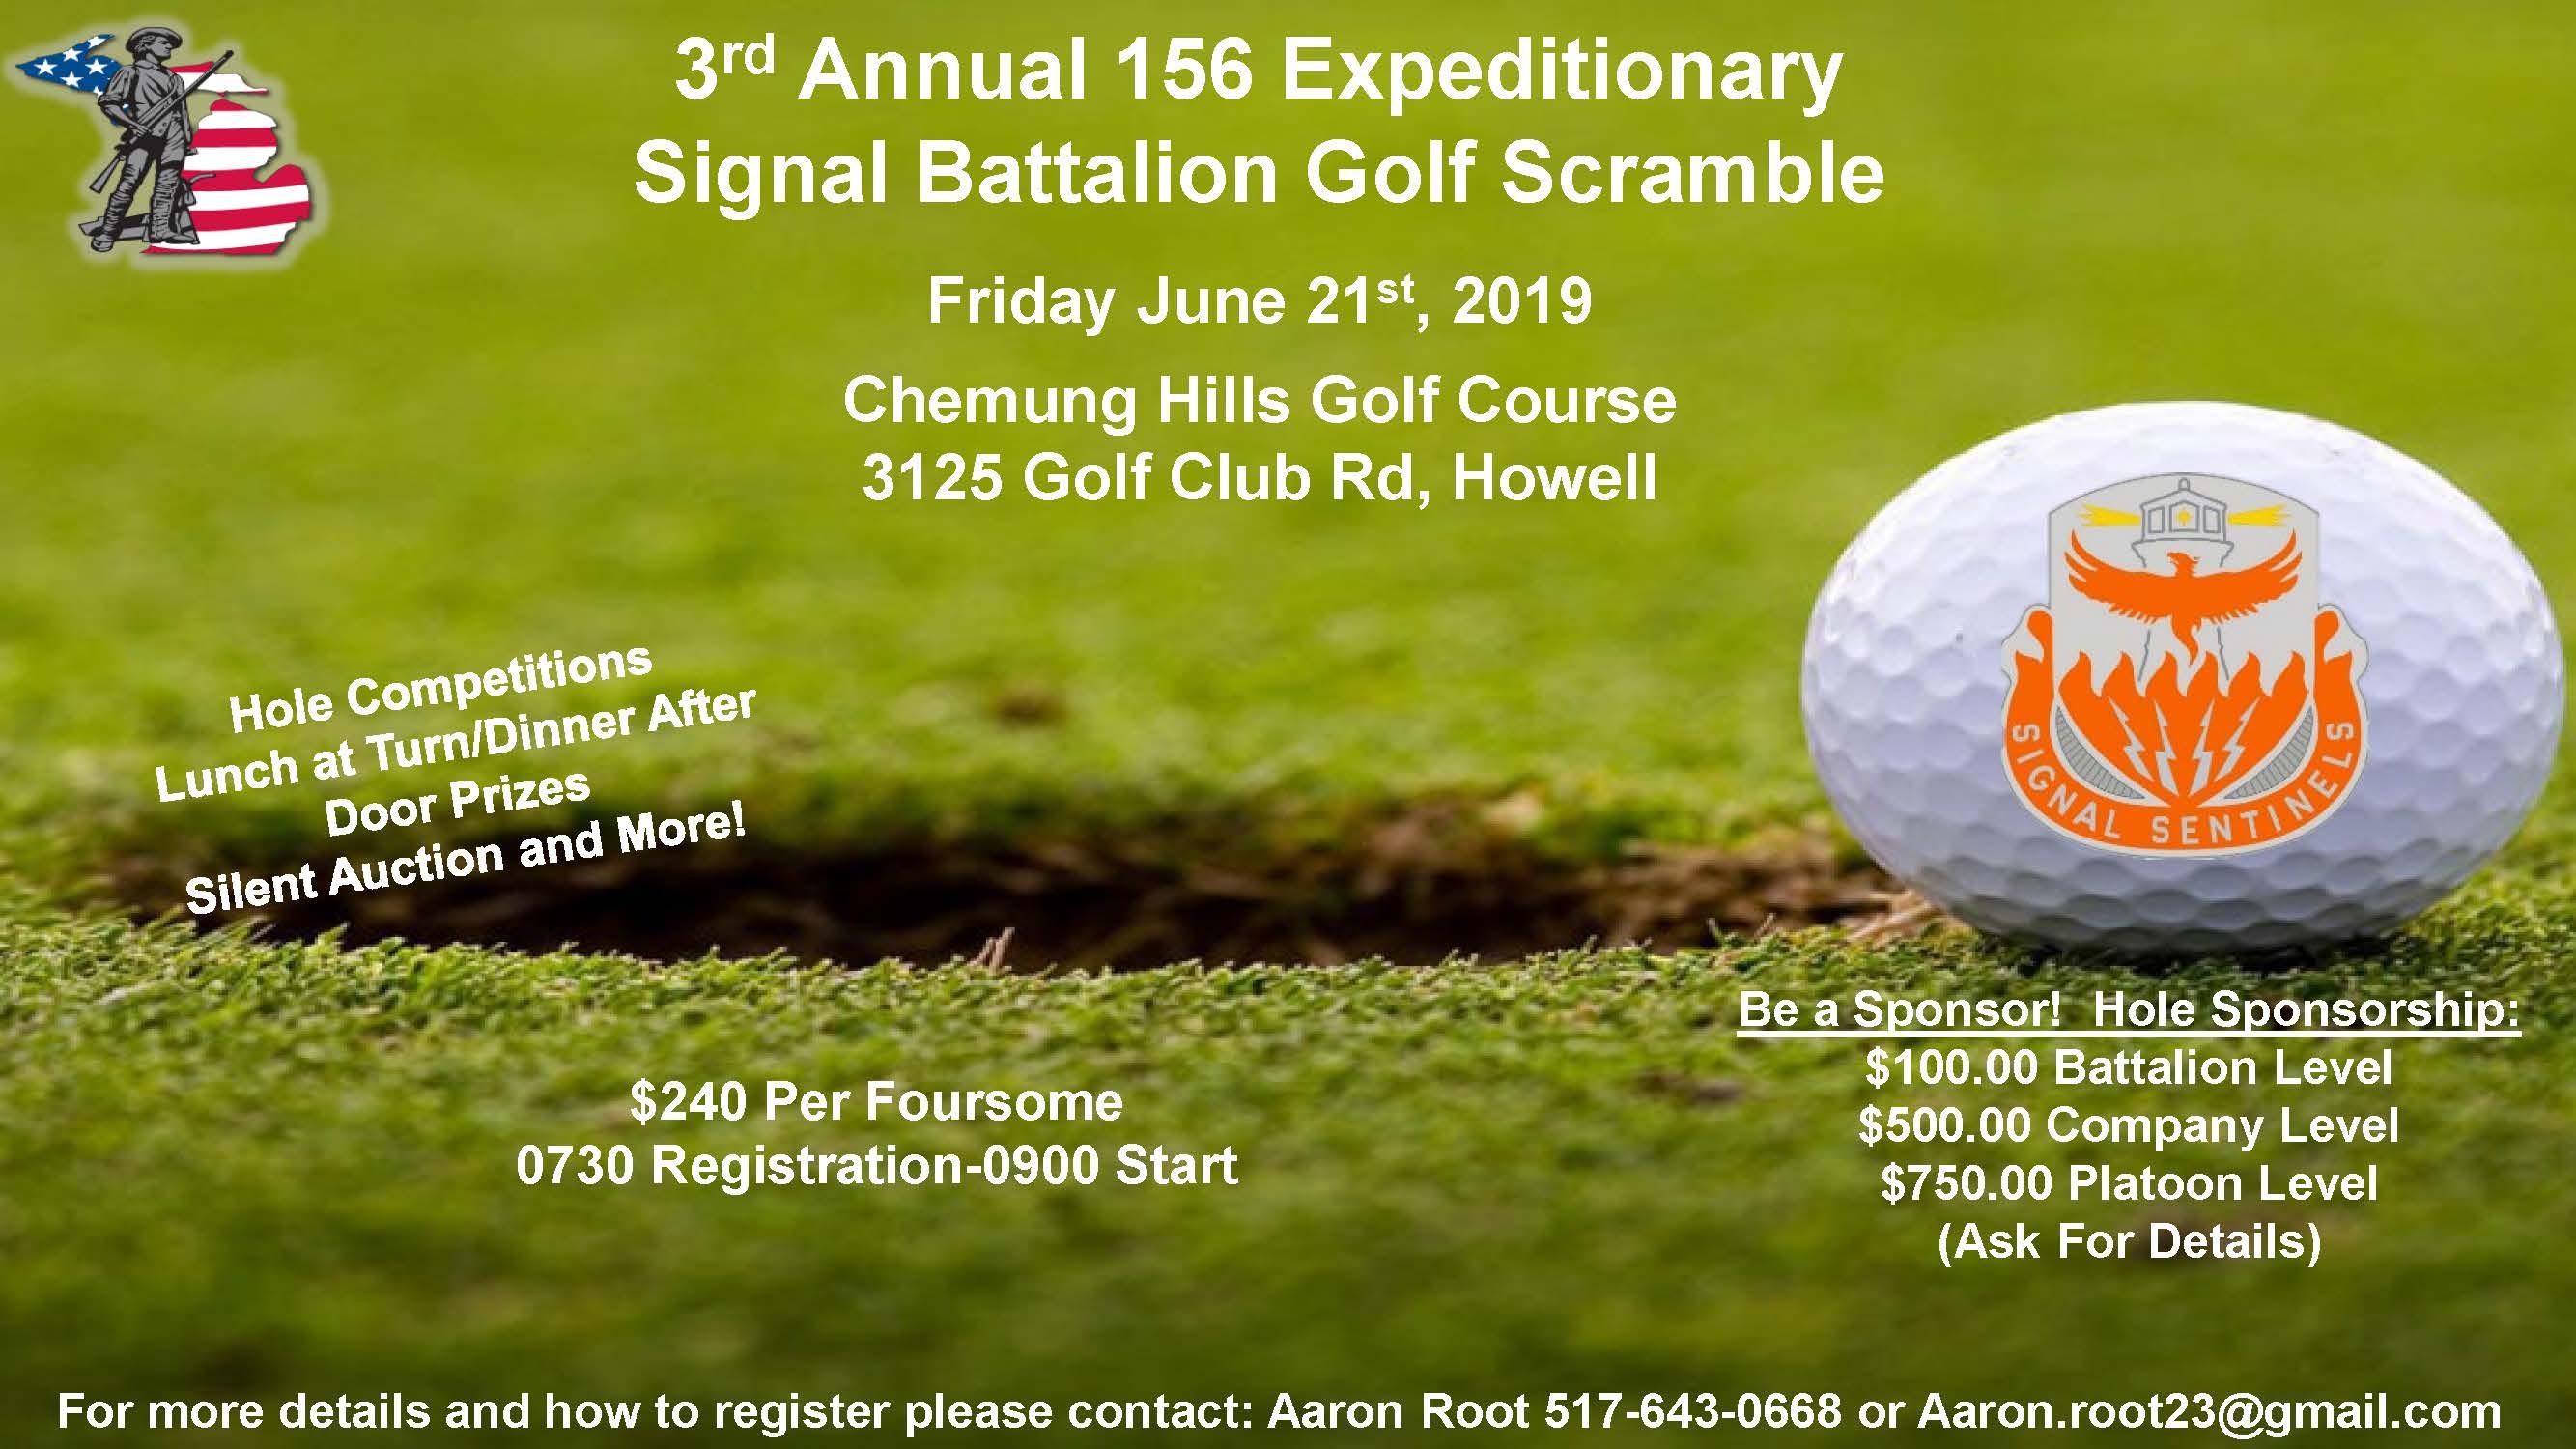 3rd Annual Golf Outing- 156 Expeditionary Signal Battalion